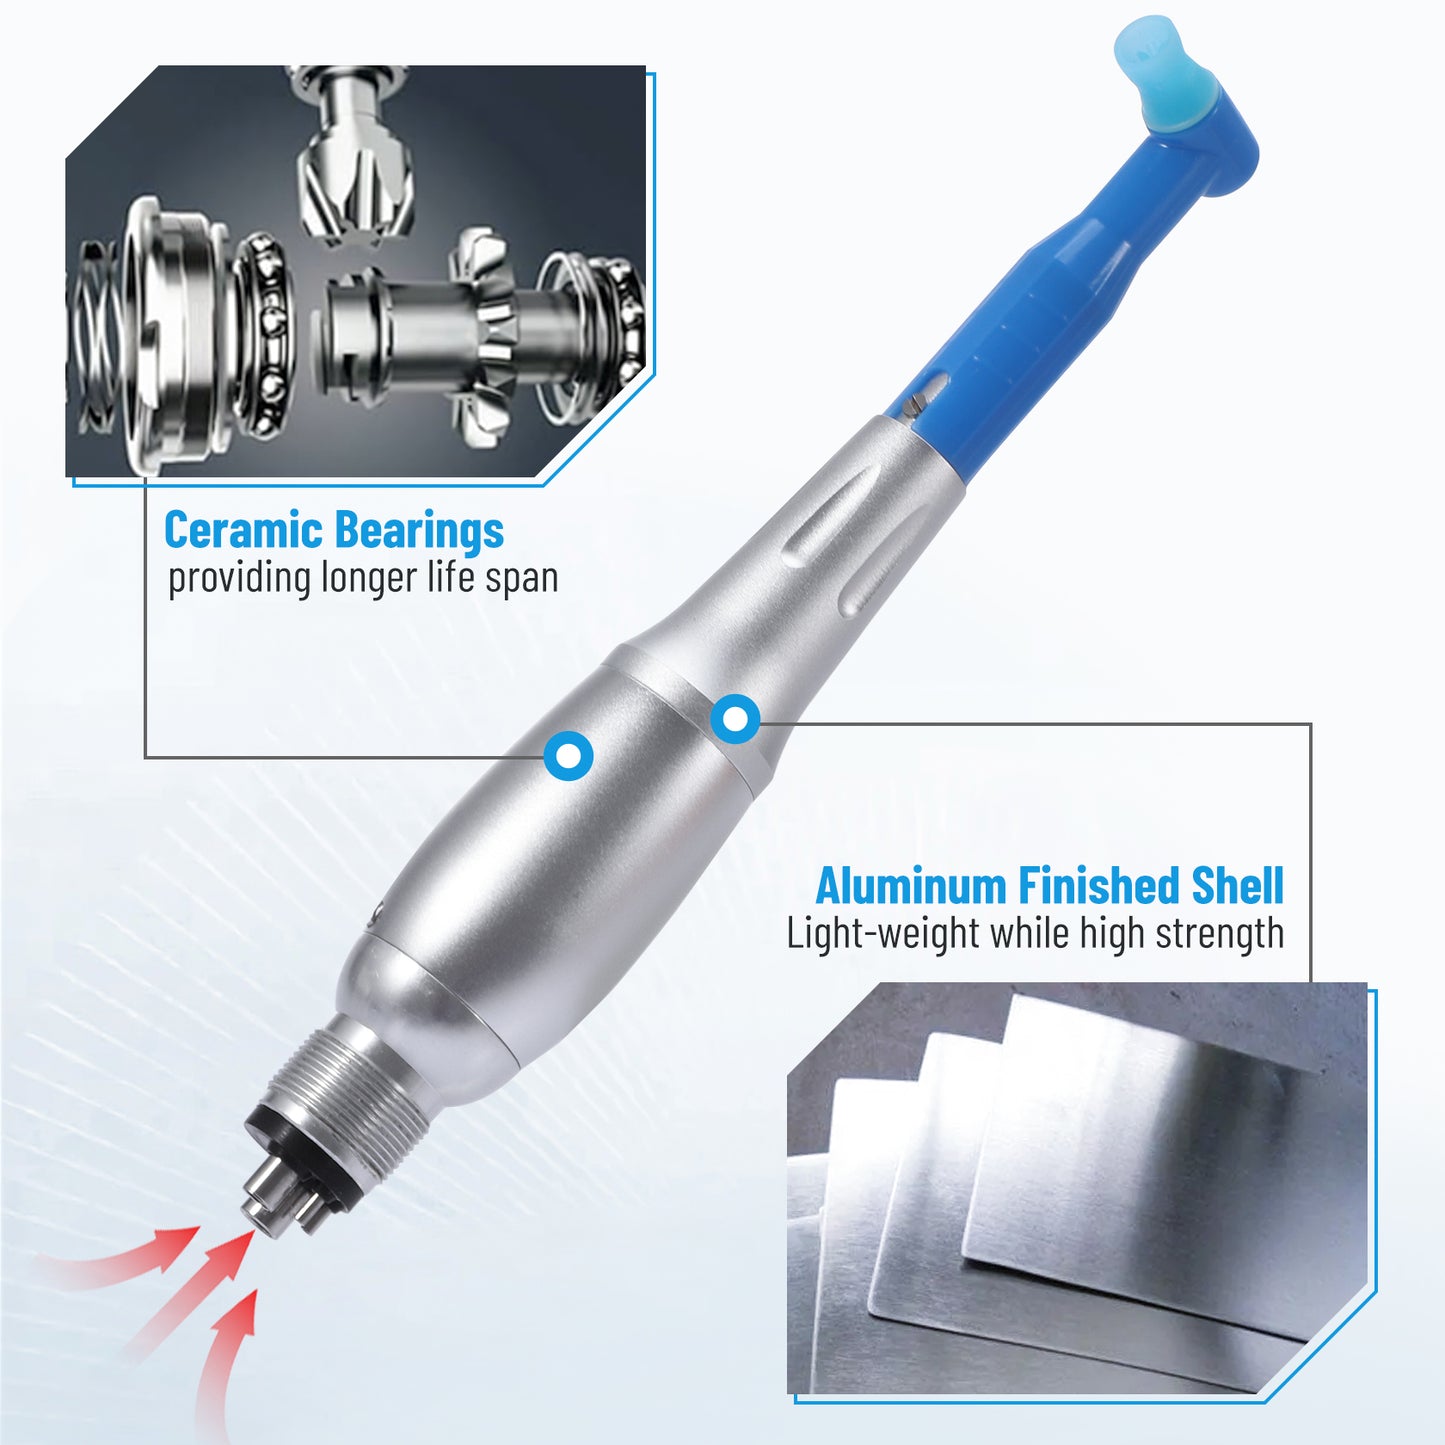 4E's USA Hygiene Handpiece: Prophy Angle Air Motor & Dental Handpiece, 4:1 Reduction, 2500-3500 RPM & 4 Holes Connection, 510(K) Approved